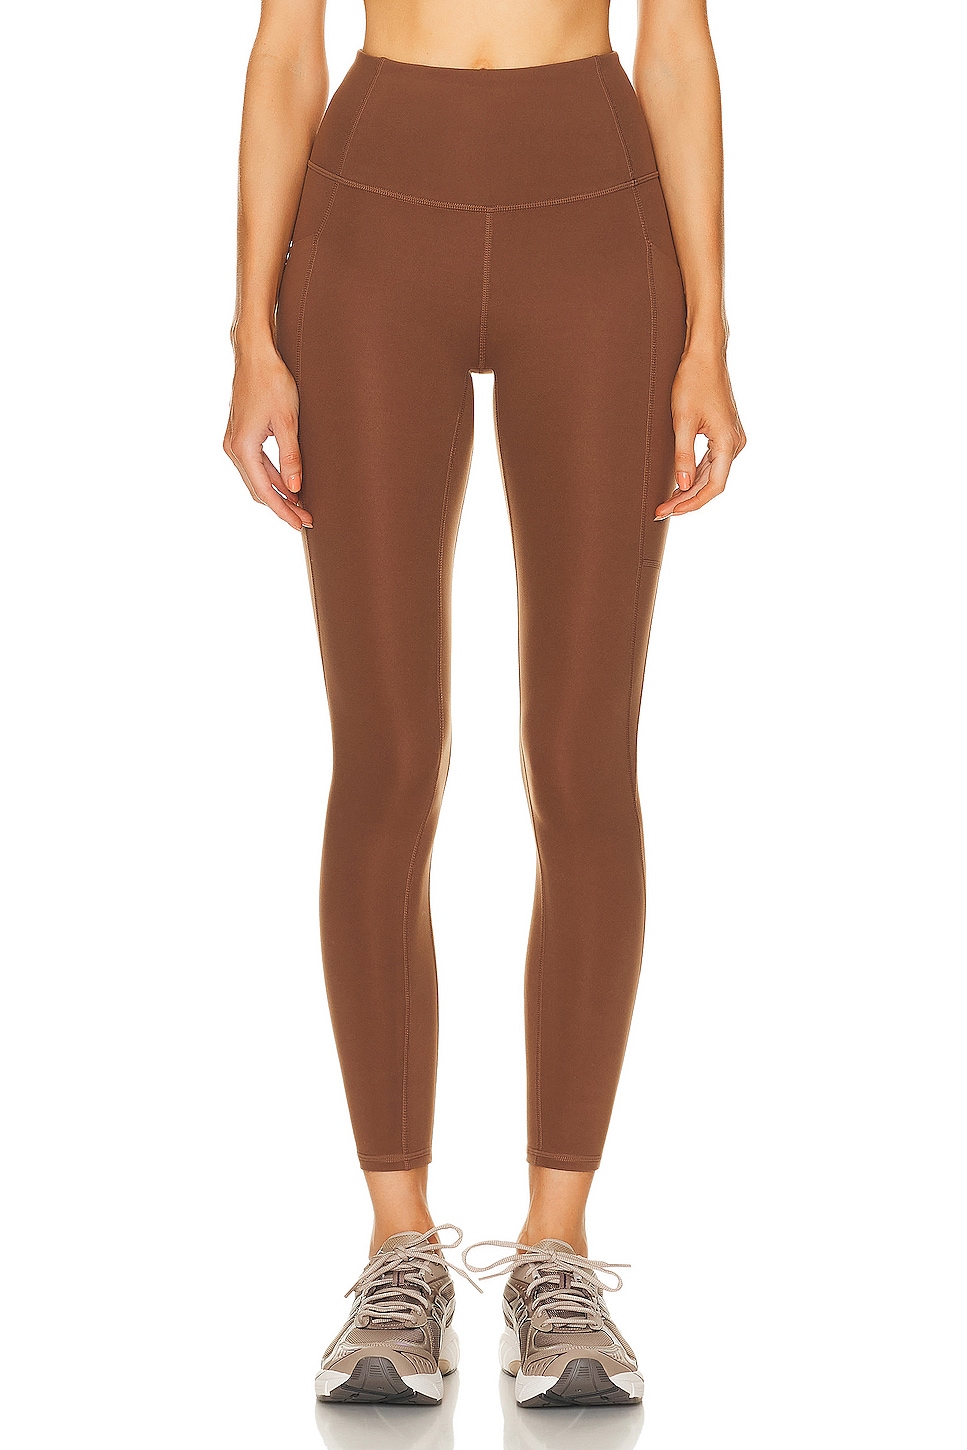 Image 1 of Varley Lets Move Pocket High 25 Legging in Cocoa Brown